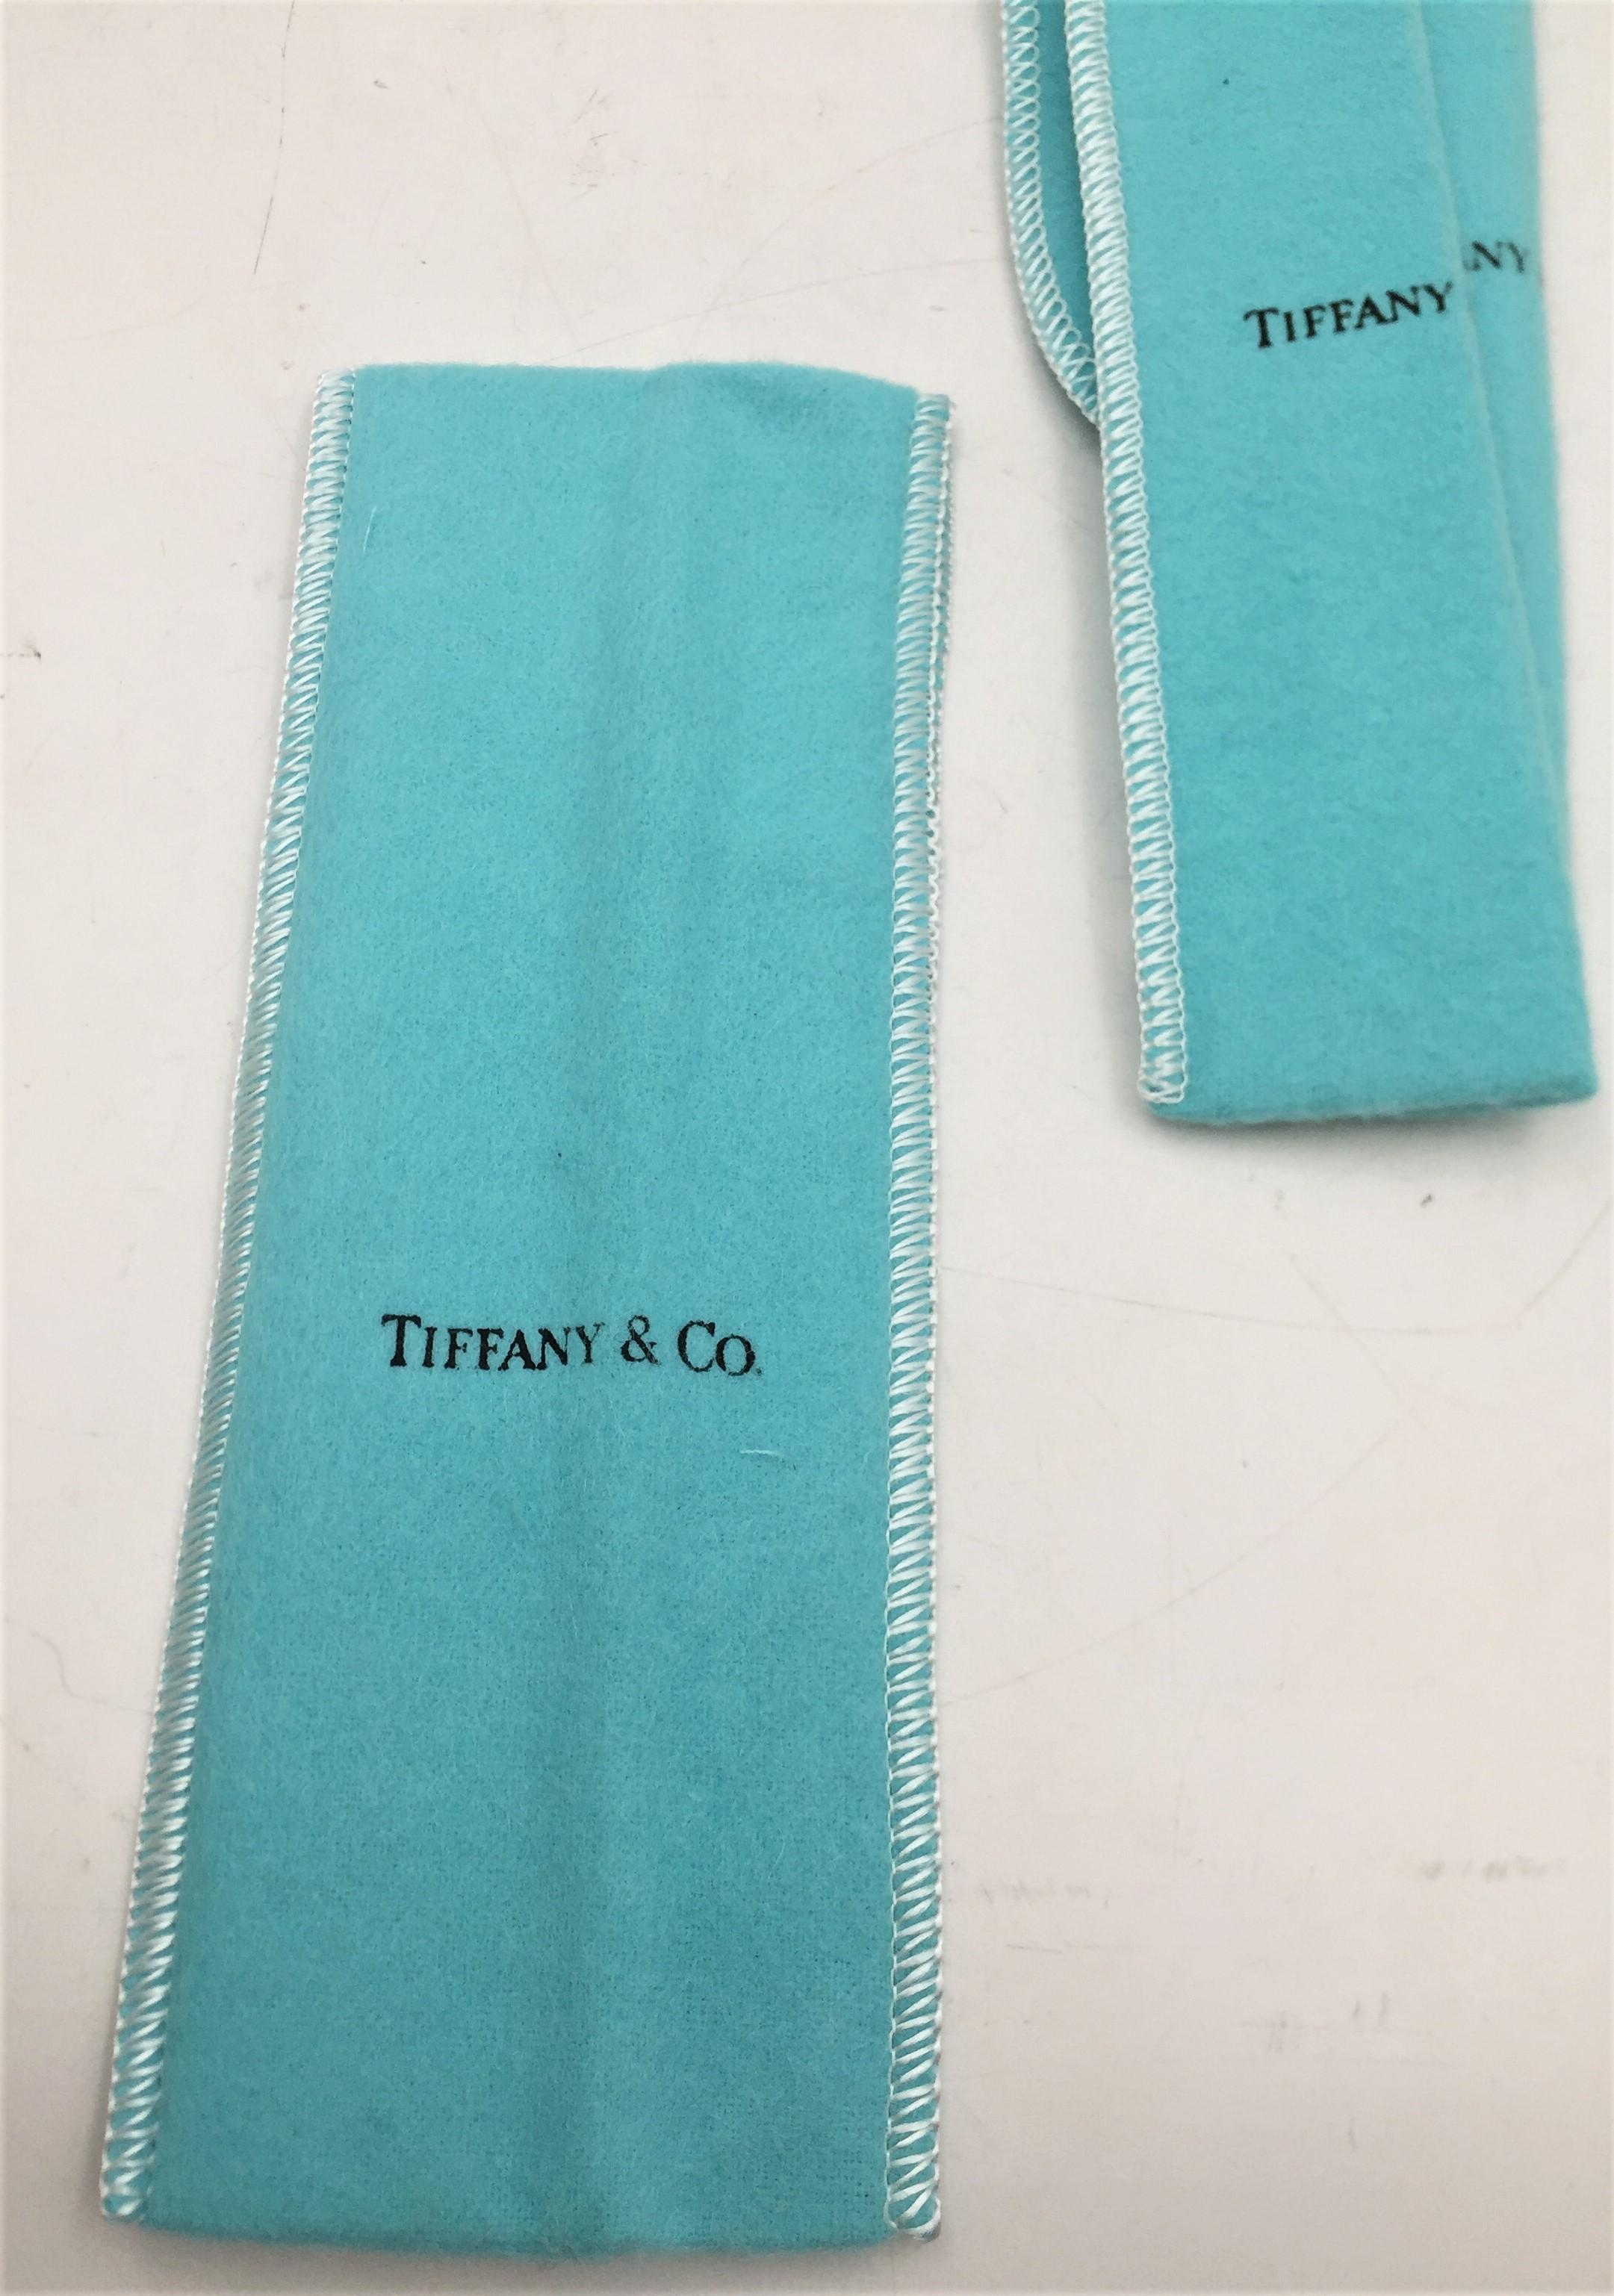 20th Century Set of 4 Tiffany & Co. Silver Rulers in Original Pouches